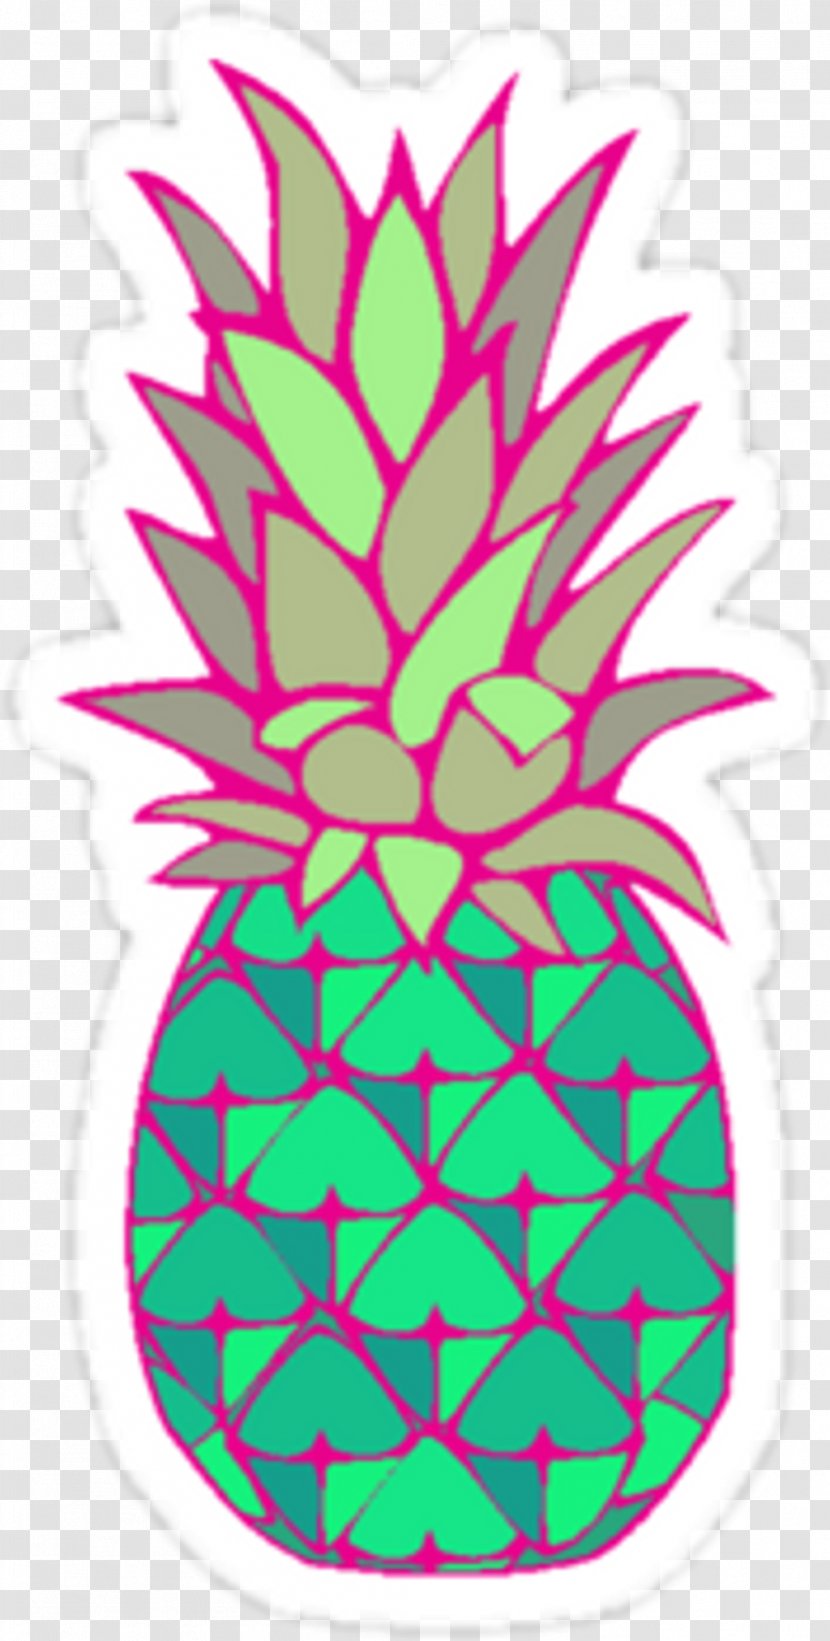 Sticker Red Pineapple Decal Clip Art - Plant - Crown Transparent PNG